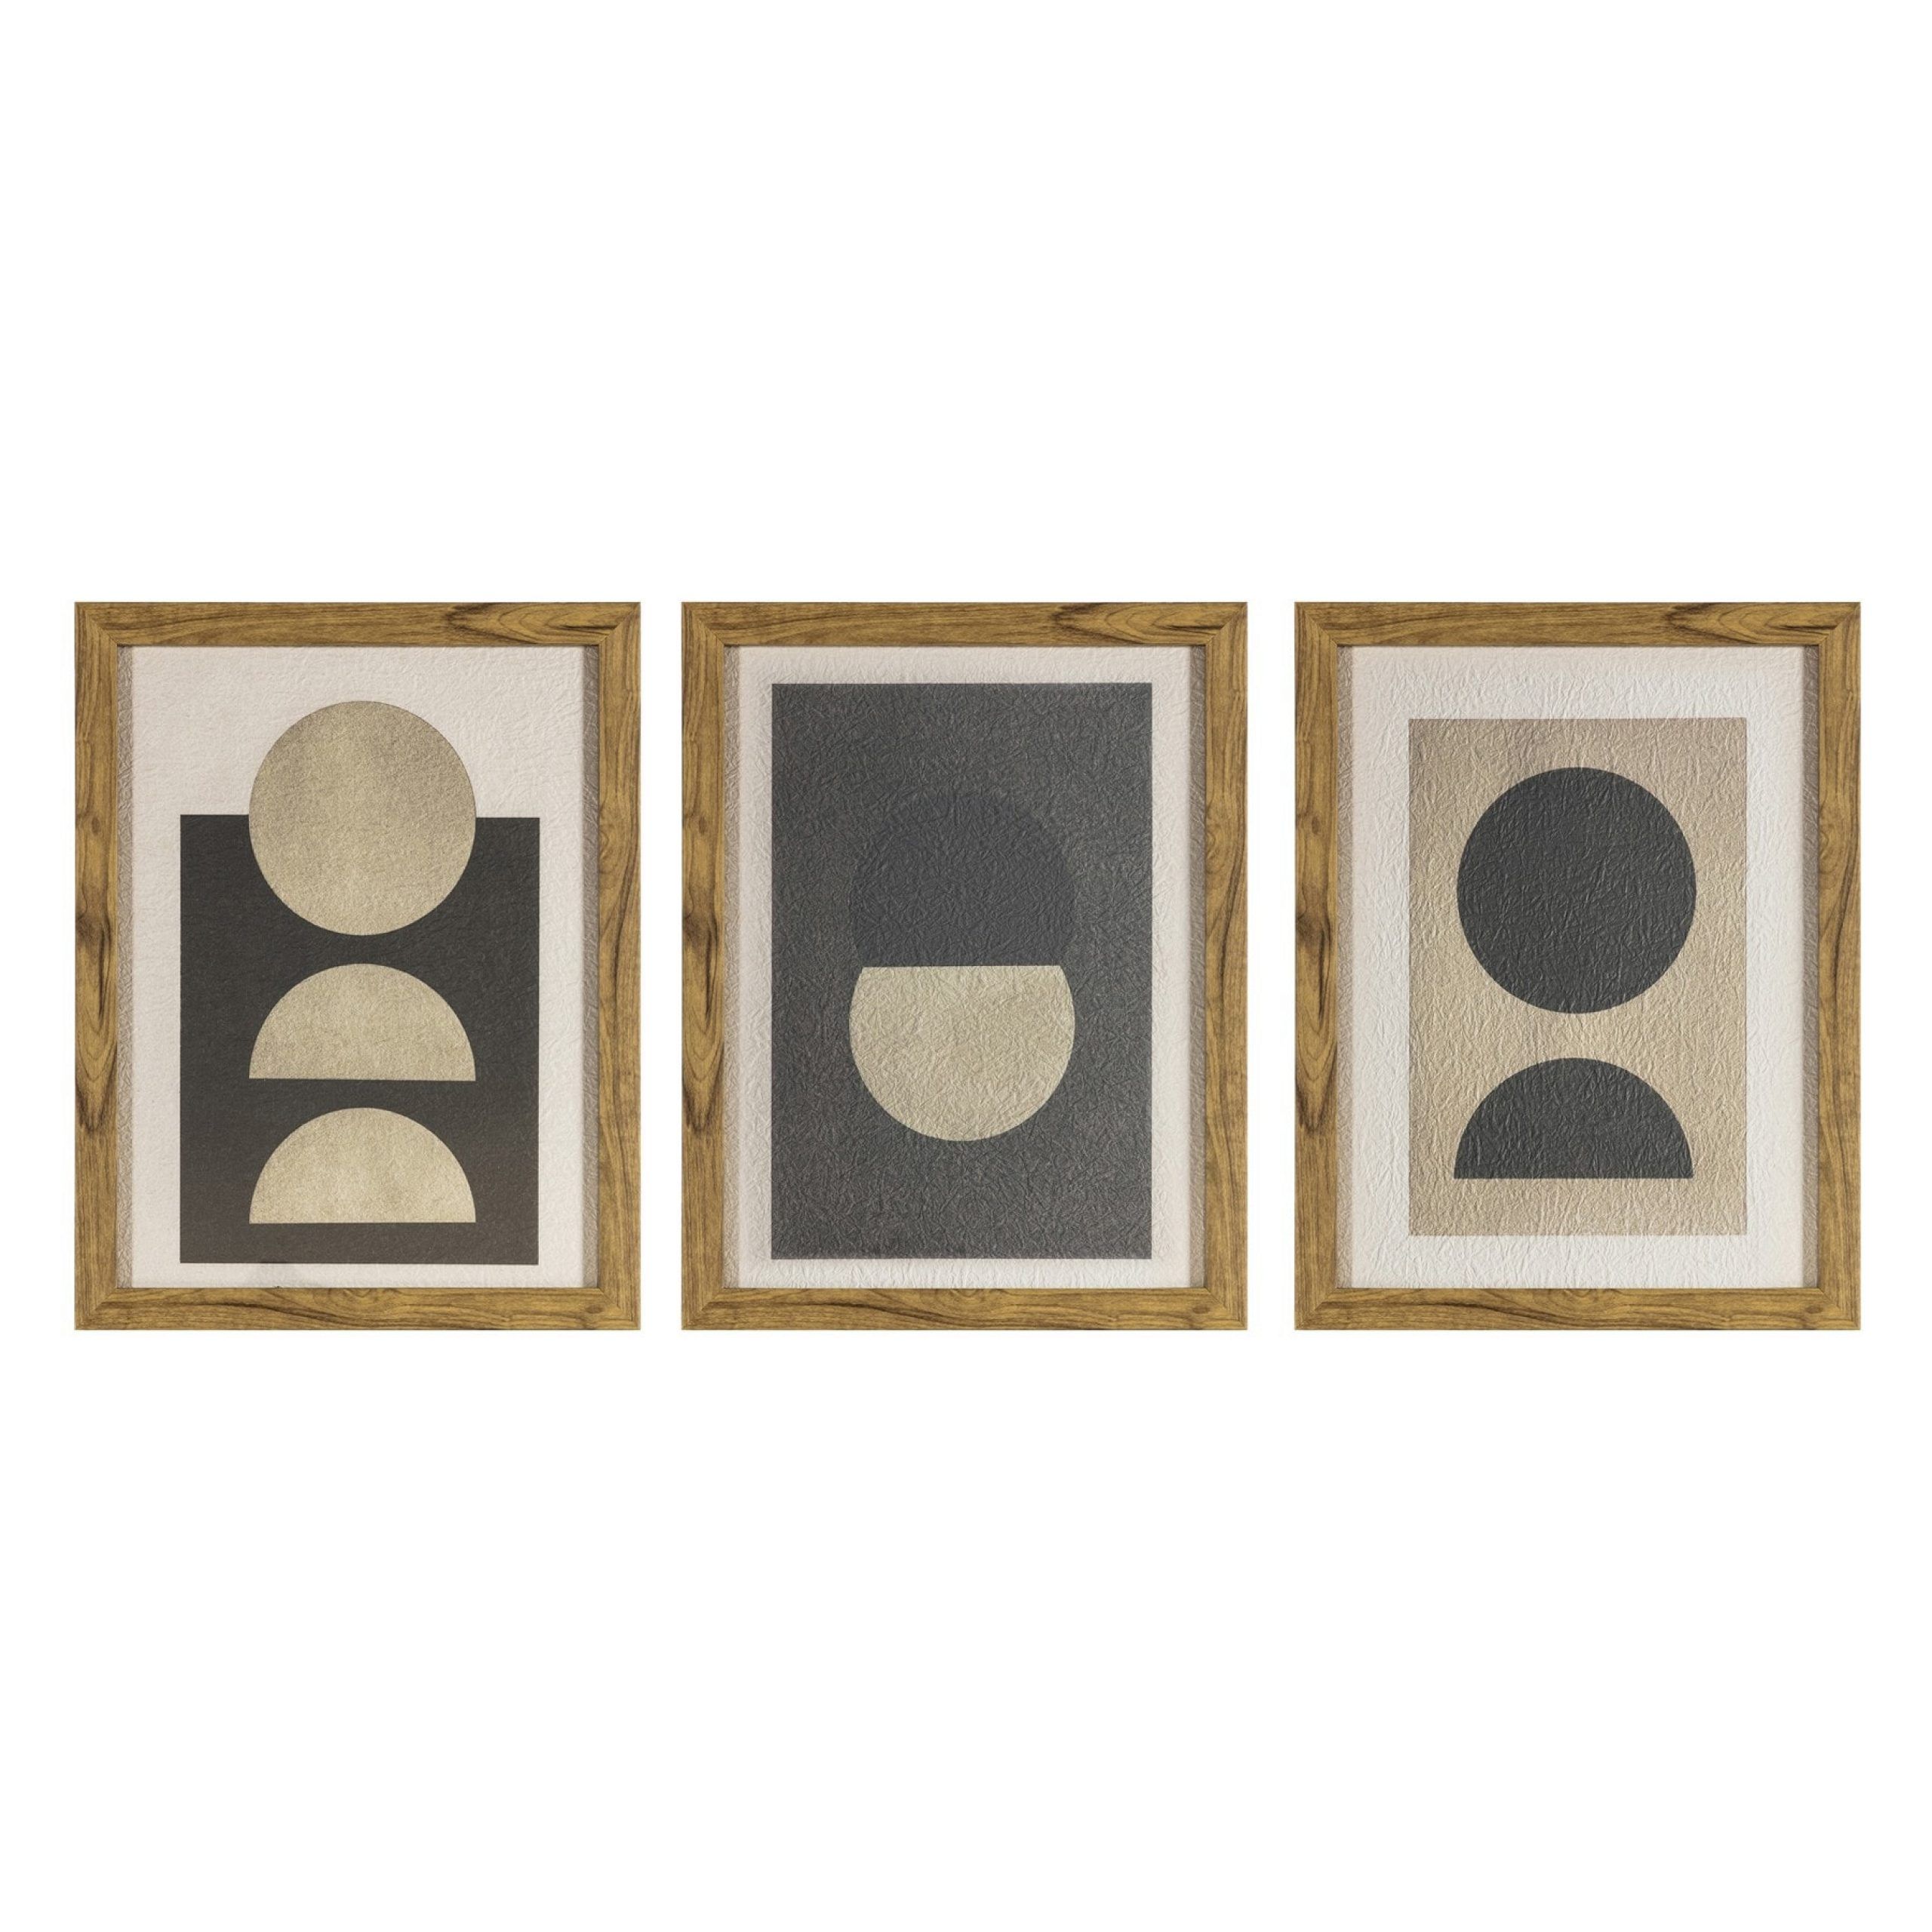 Most Popular Luna Wood Wall Art With Regard To Buy Set Of 3 Luna Framed Wall Artgallery Direct From (View 10 of 20)